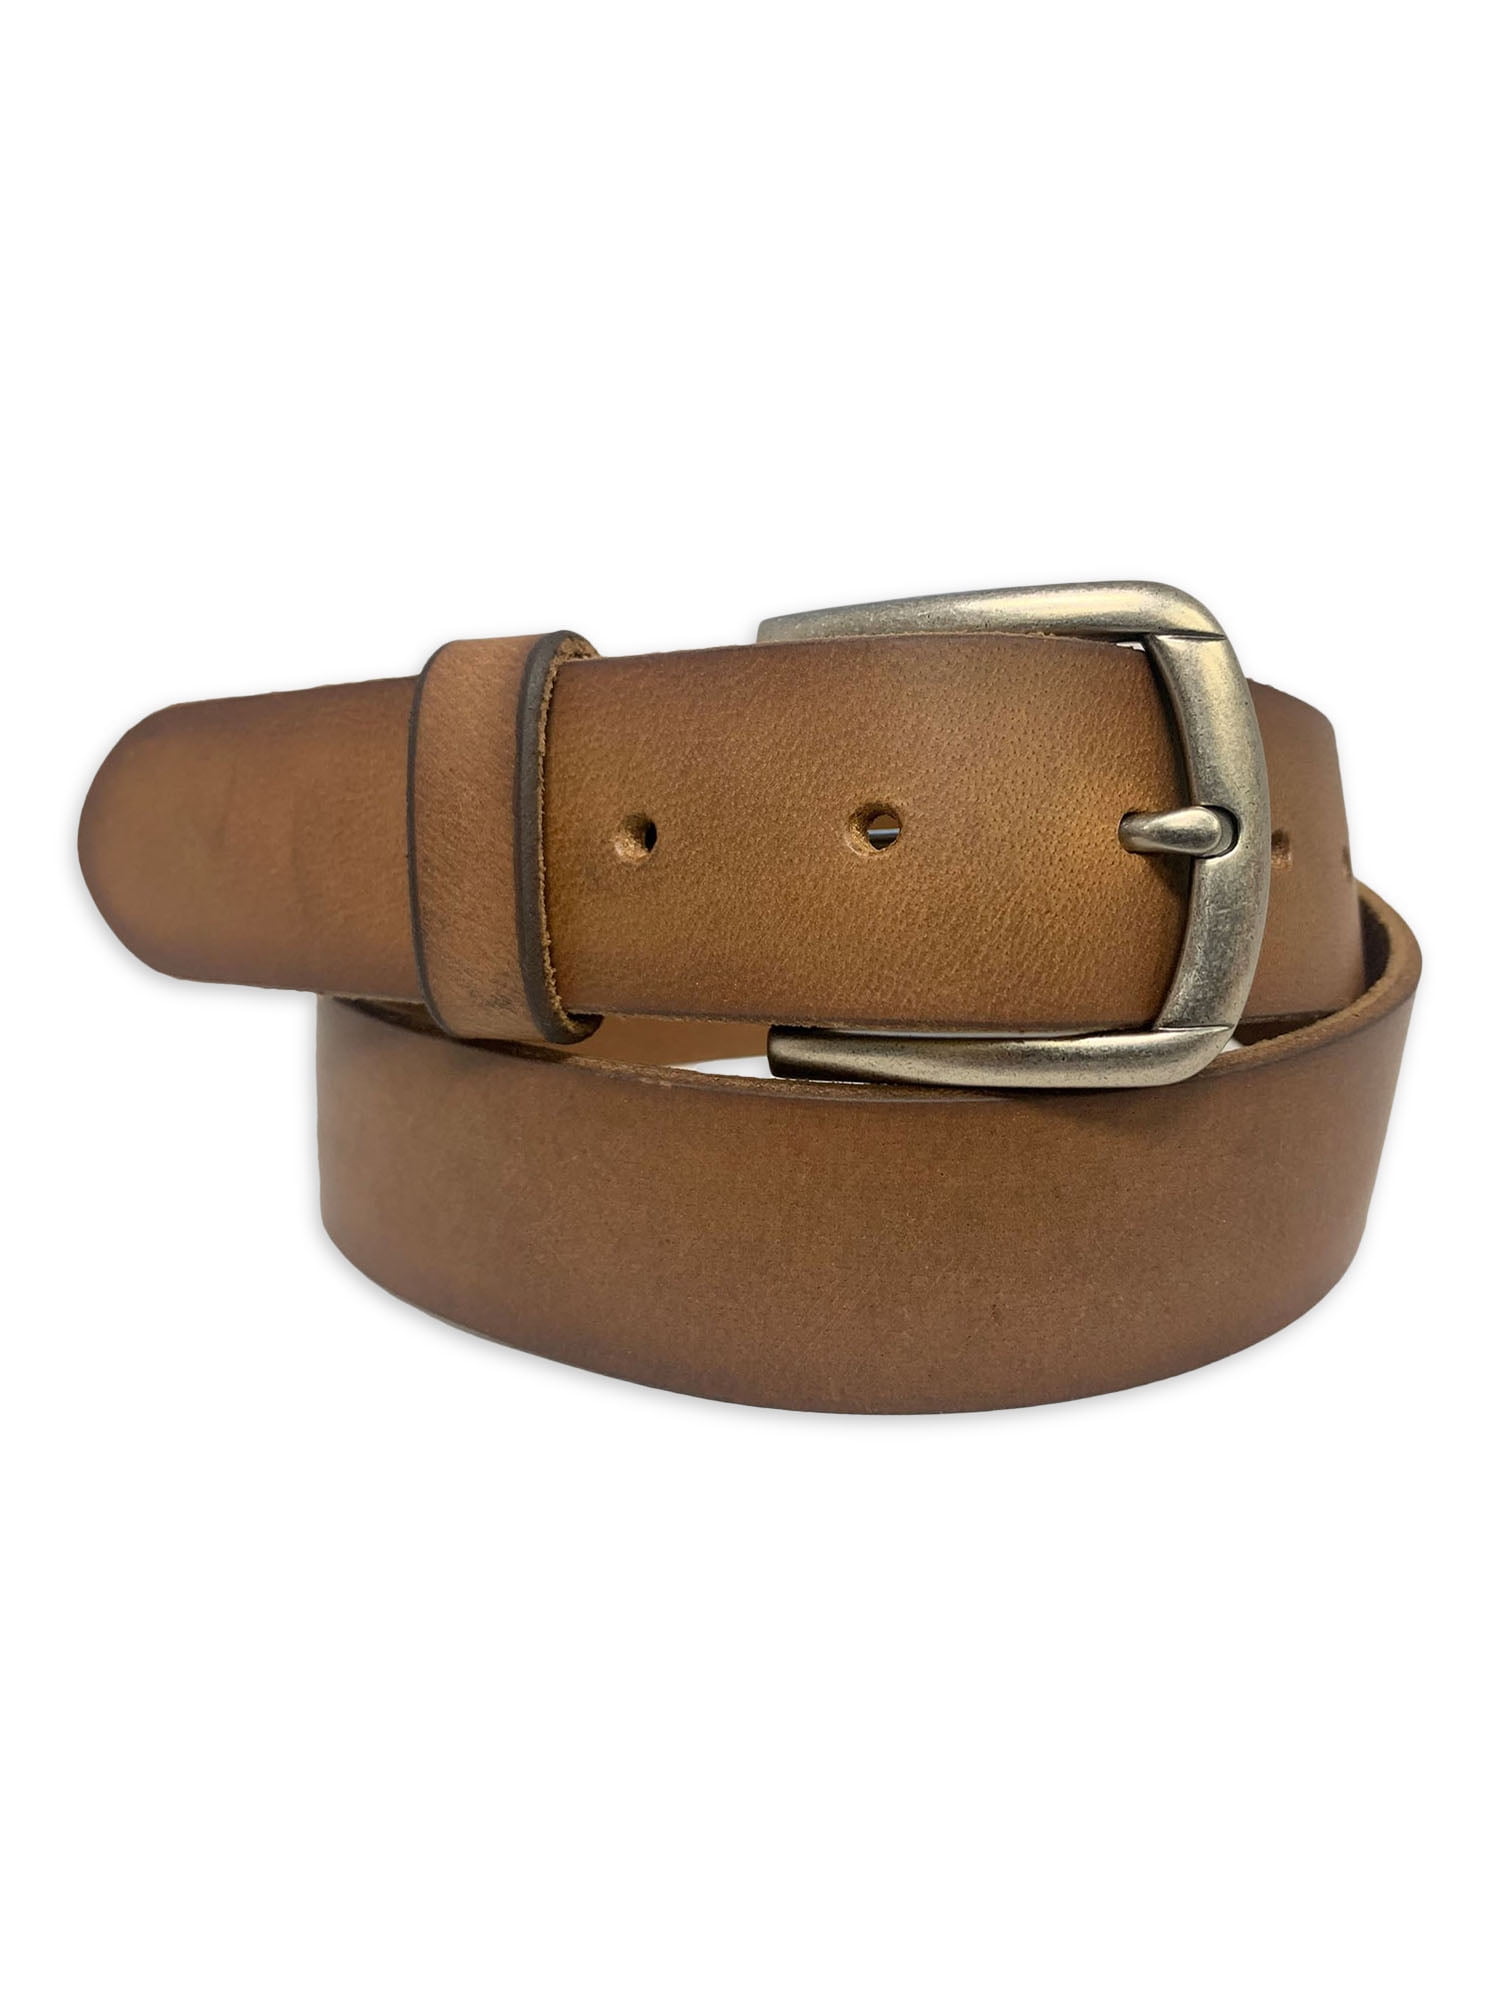 George Men's 38mm Snapon Tan Leather Casual Belt 